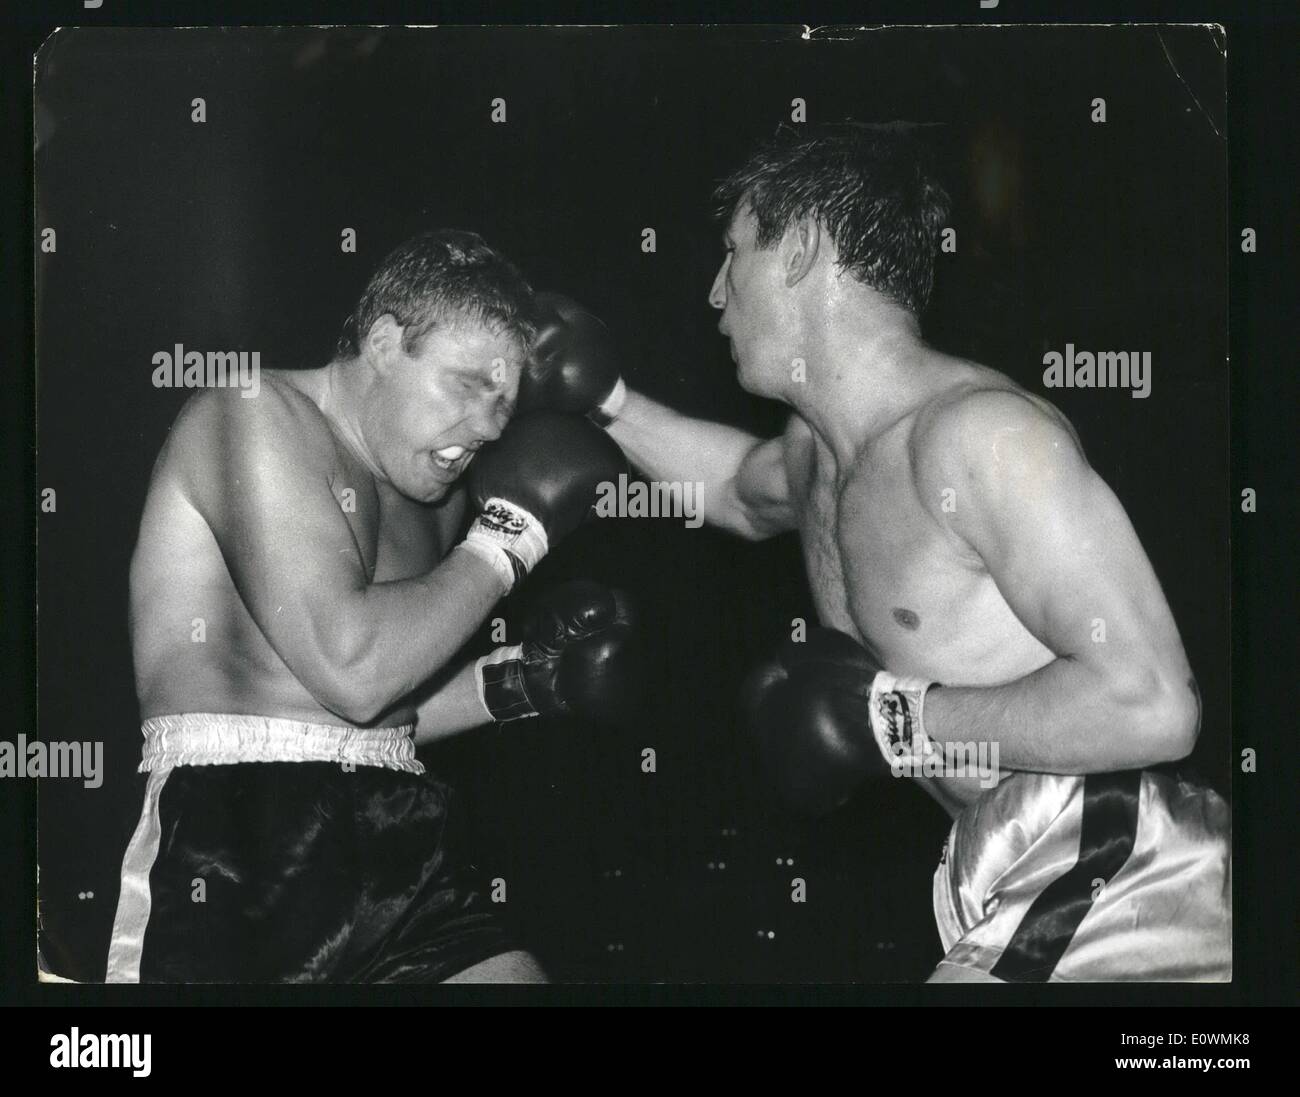 Sep. 09, 1963 - BILLY WALKER TAKES ONE TO THE HEAD.. BEATS PRESCOTT IN A TECHNICAL K.O... The face of west heavyweight Billy Walker (left) is distorted as he takes a right to the head from Birmingham's Johnny Prescott during their contest at the Wembley Stadium - last night . Walker scored a technical K.O. when the referee stopped the fight only seconds before the end of the last round. Stock Photo